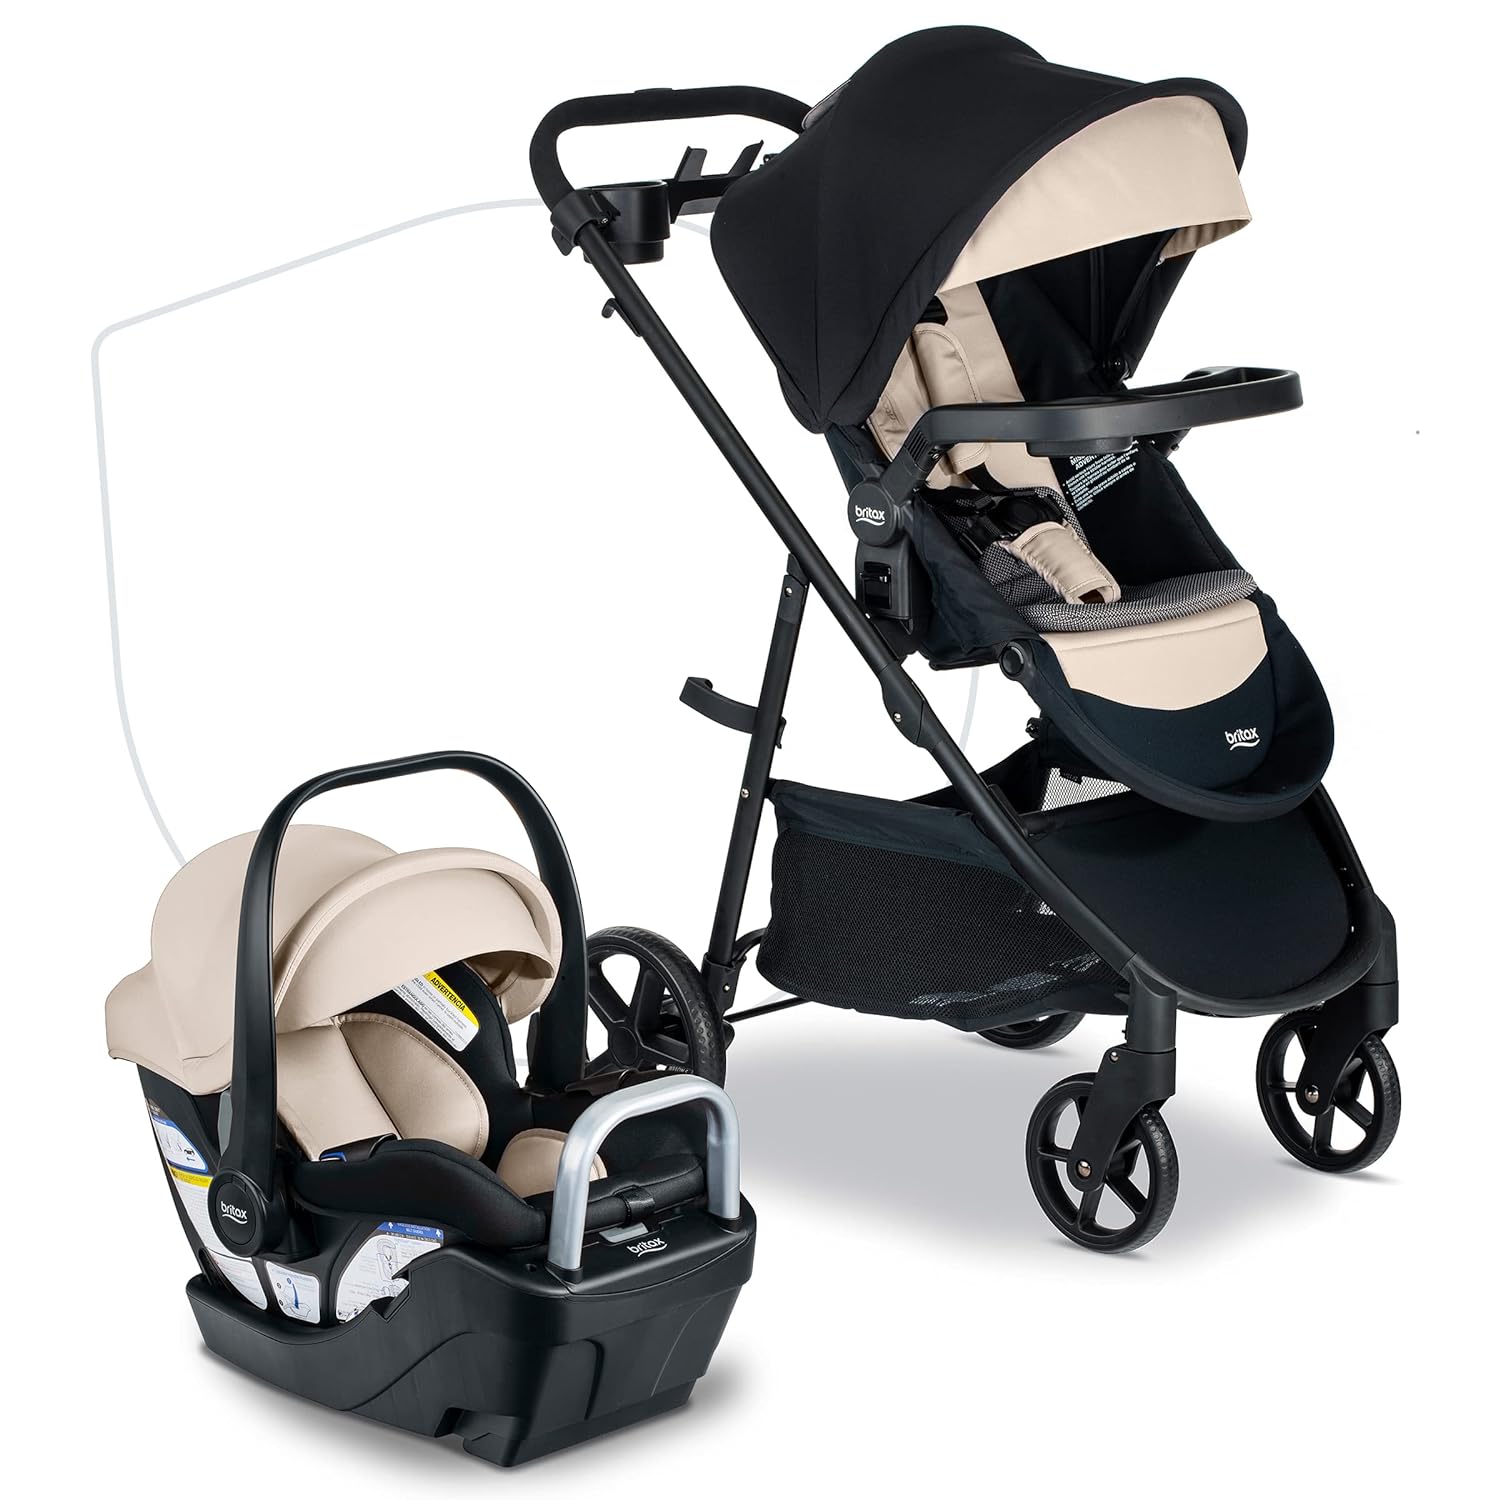 Britax Willow Brook S+ Baby Travel System Review